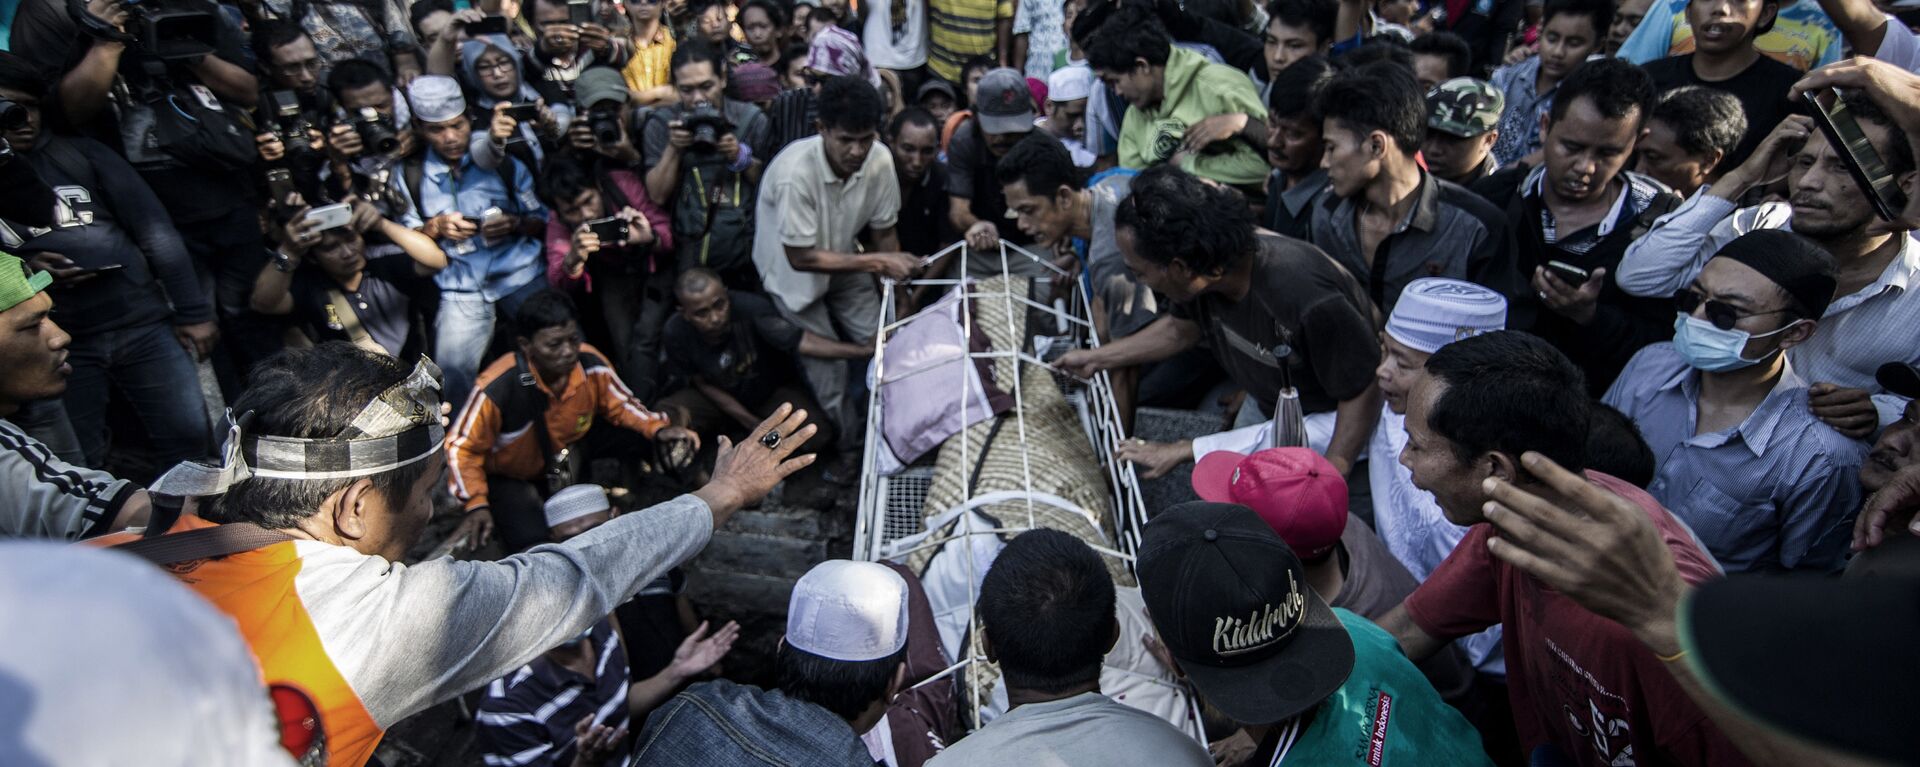 Relatives and friends bury the body of Indonesian man Freddy Budiman in Surabaya, East Java, on July 29, 2016 after his execution at Nusa Kambangan island. Indonesia on July 29 executed four drug convicts on July 29 but 10 others due to face the firing squad were given an apparent reprieve in a confused process one lawyer condemned as a complete mess - Sputnik International, 1920, 29.07.2016